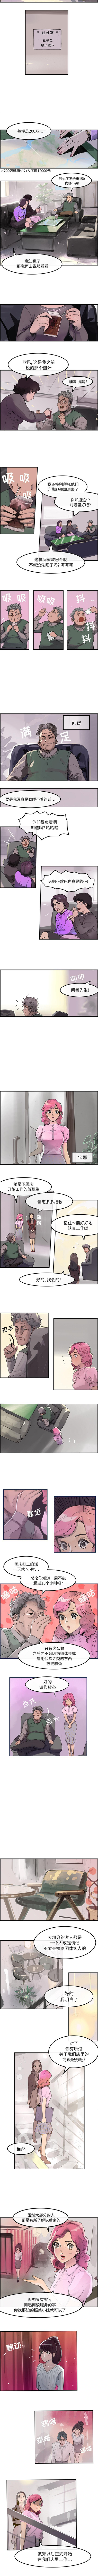 Indonesia 任何小姐 1-31 Audition - Page 11